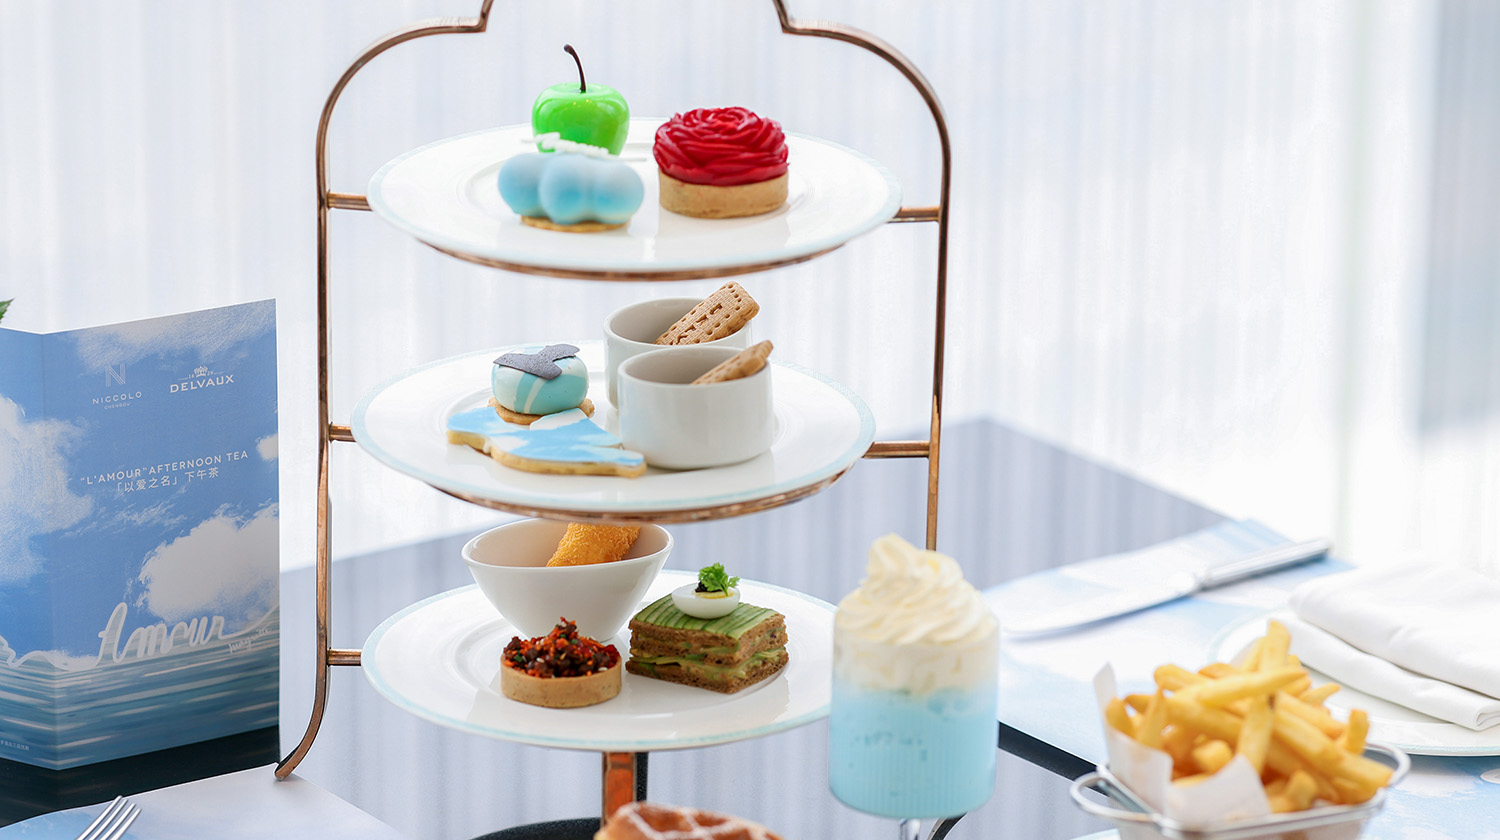 Delvaux “L&#39;Amour” Afternoon Tea